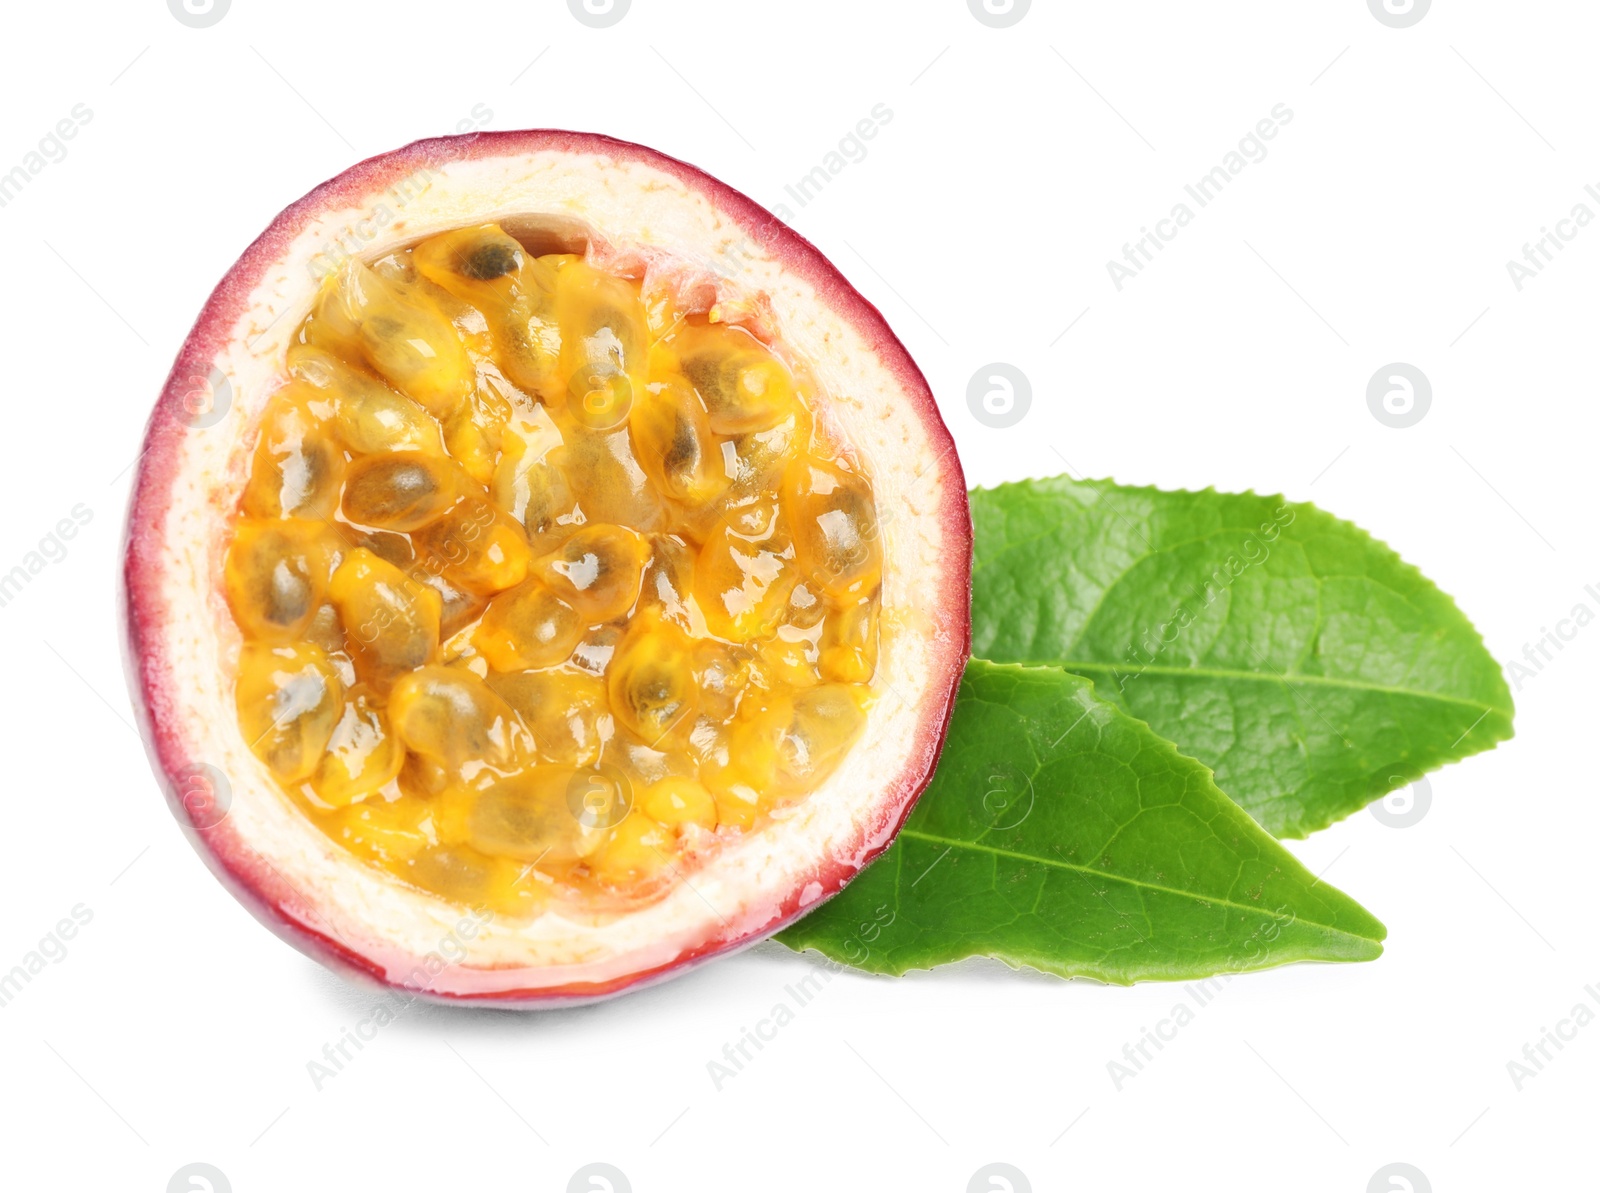 Photo of Half of fresh ripe passion fruit (maracuya) with green leaves isolated on white